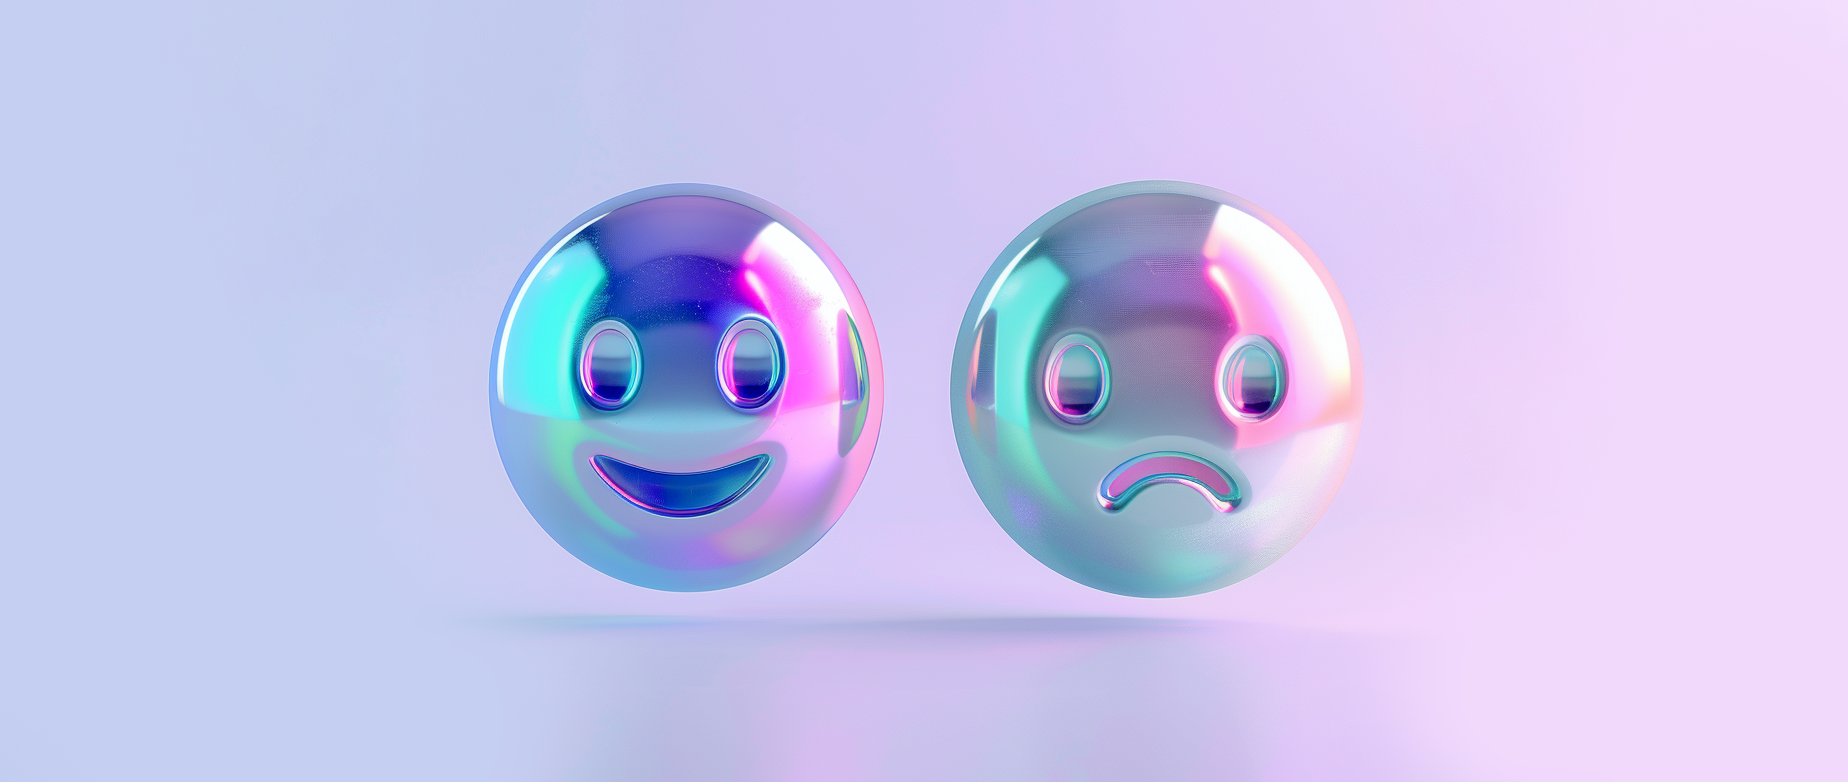 Two silver spheres with faces, one with a smile and one with a frown on a light purple background